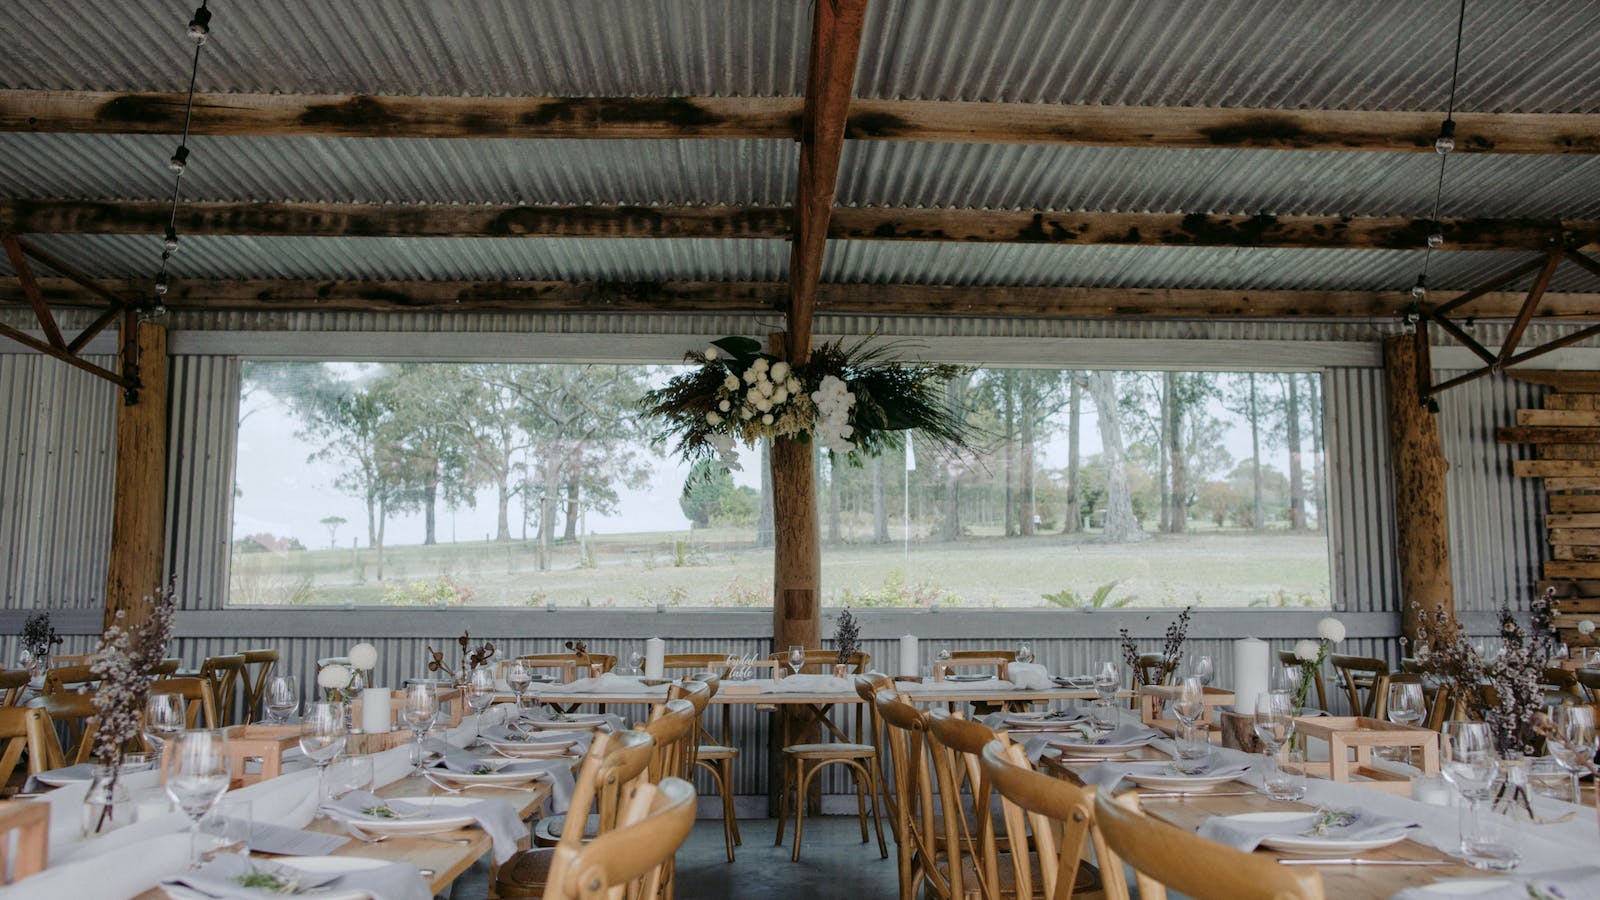 Our styling arbour at Worrowing, Jervis Bay